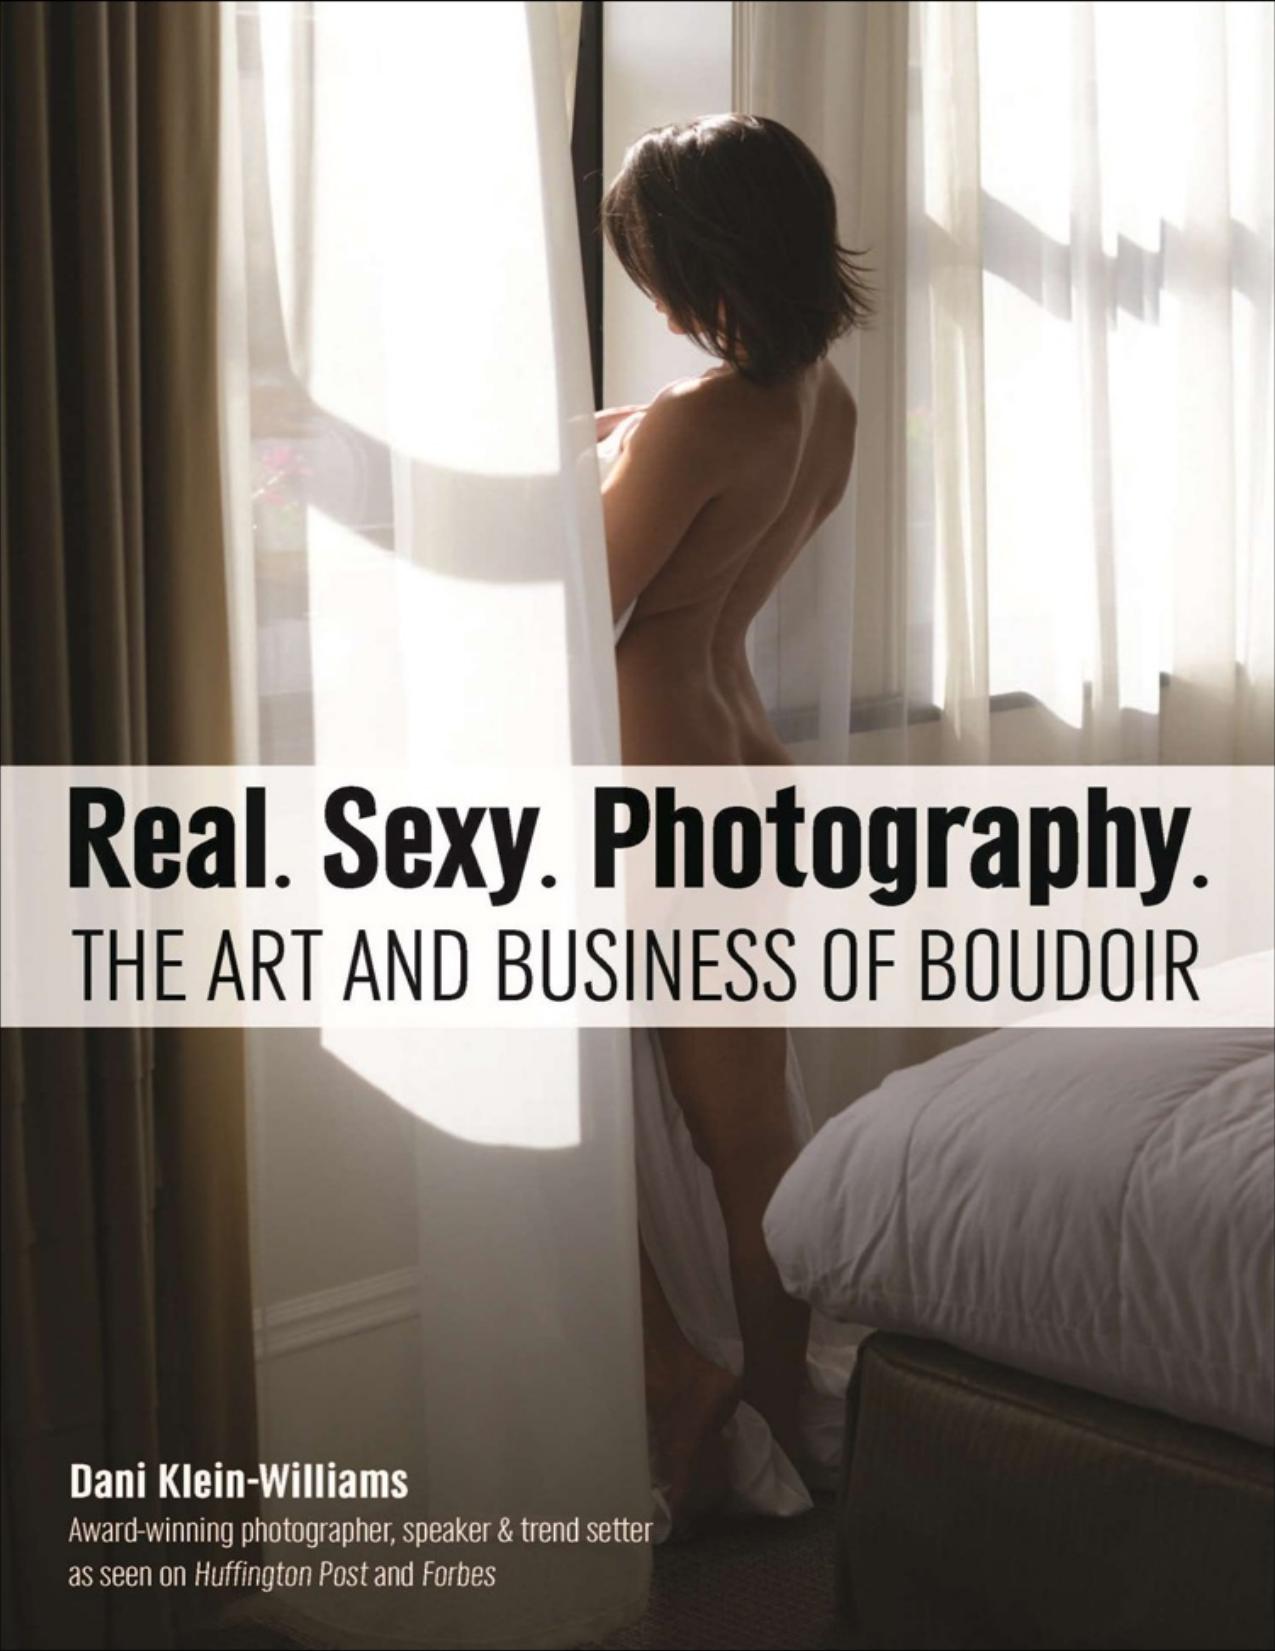 Real. Sexy. Photography. by Dani Klein-Williams